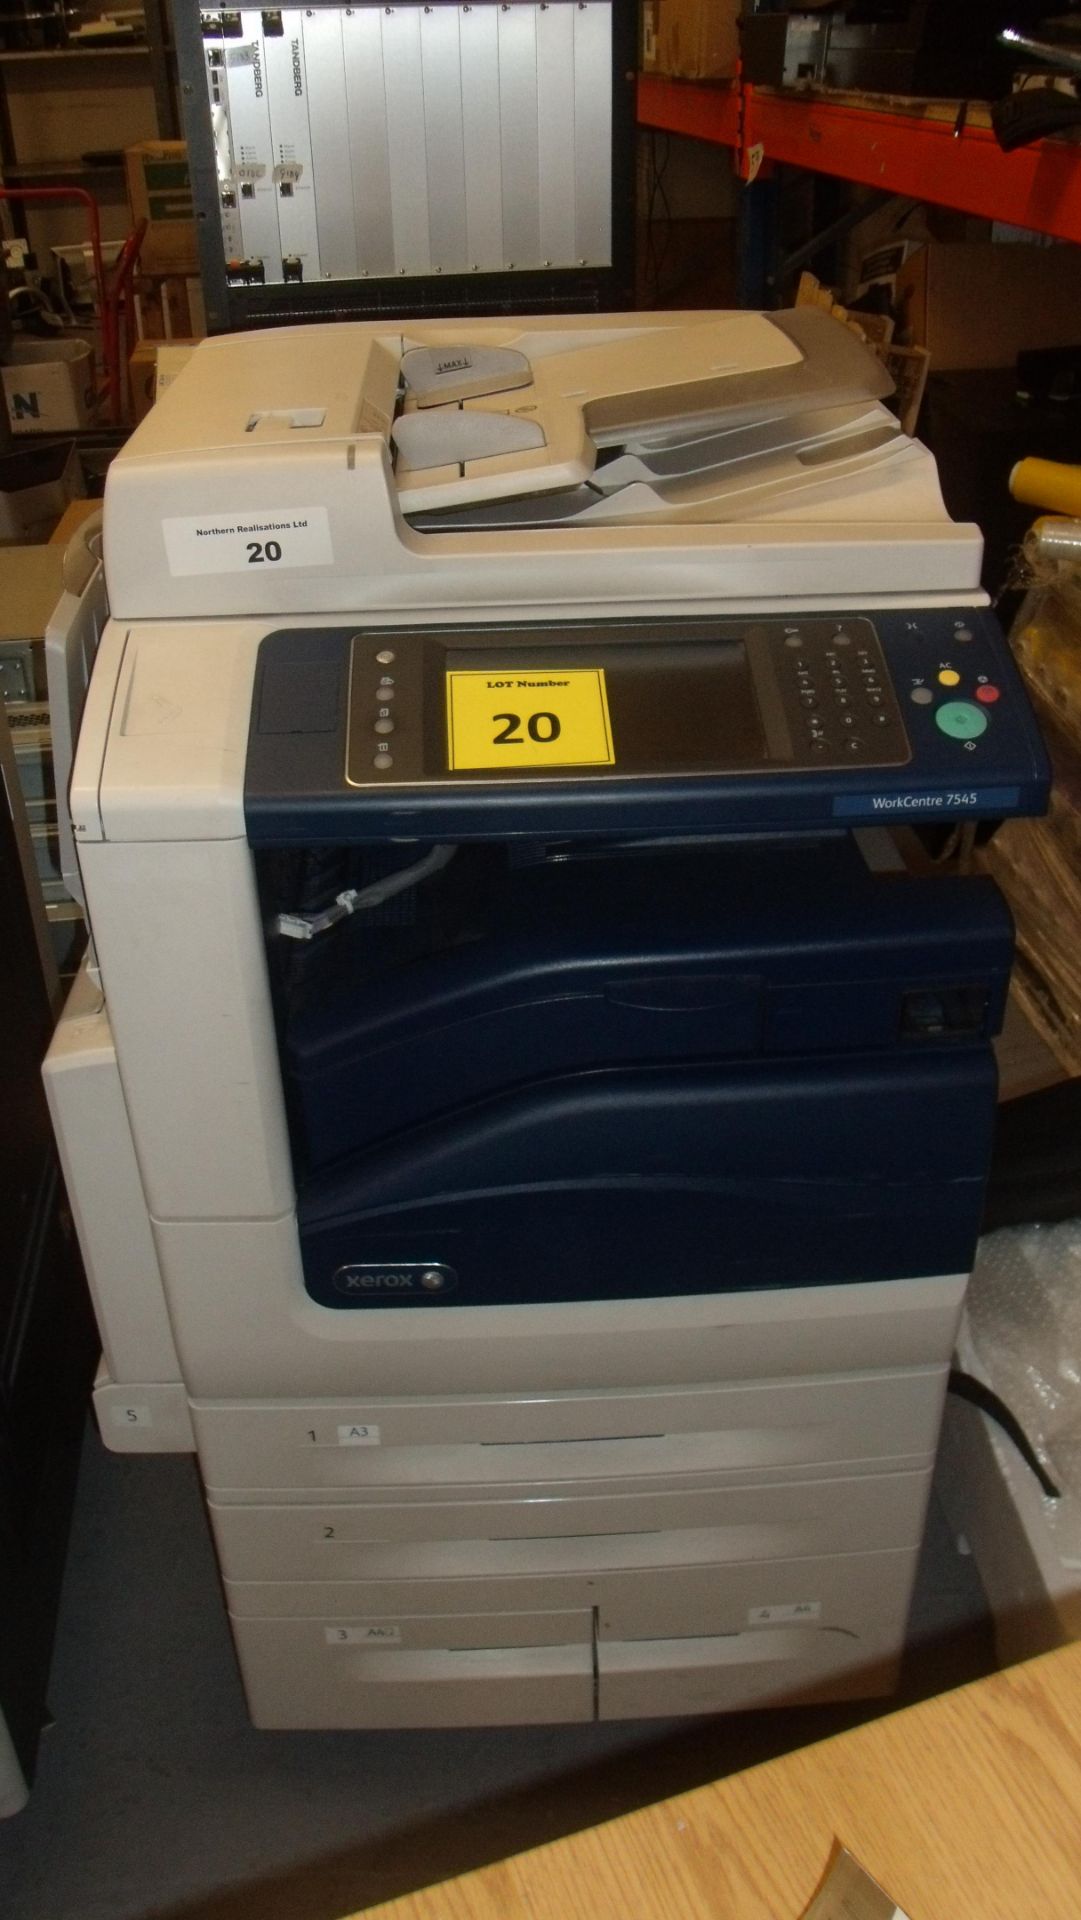 XEROX WORKCENTRE 7545. IN CLEAN COSMETIC CONDITION BUT NOT POWERING UP. FOR SPARES OR REPAIR